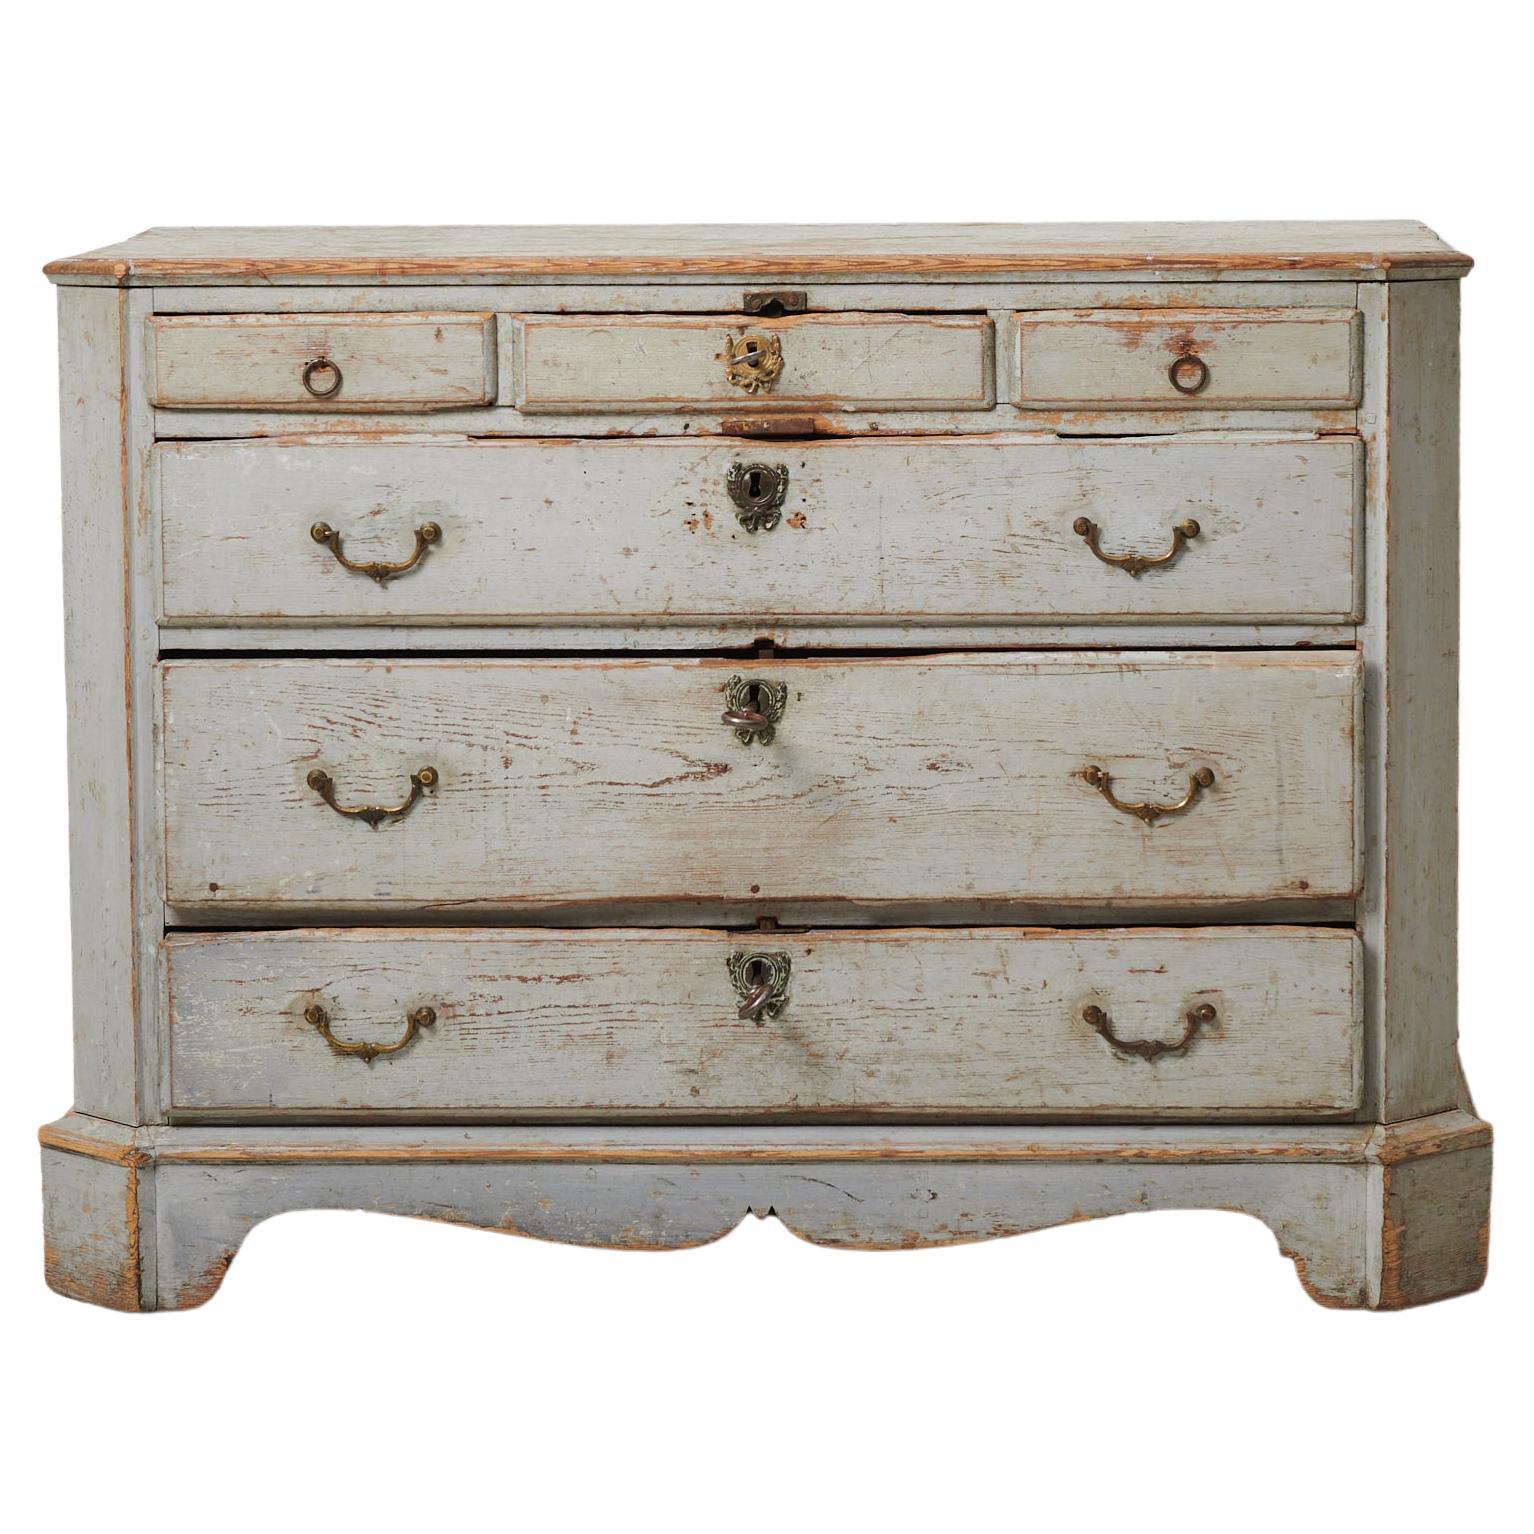 Antique Northern Swedish Classic Gustavian Chest of Drawers